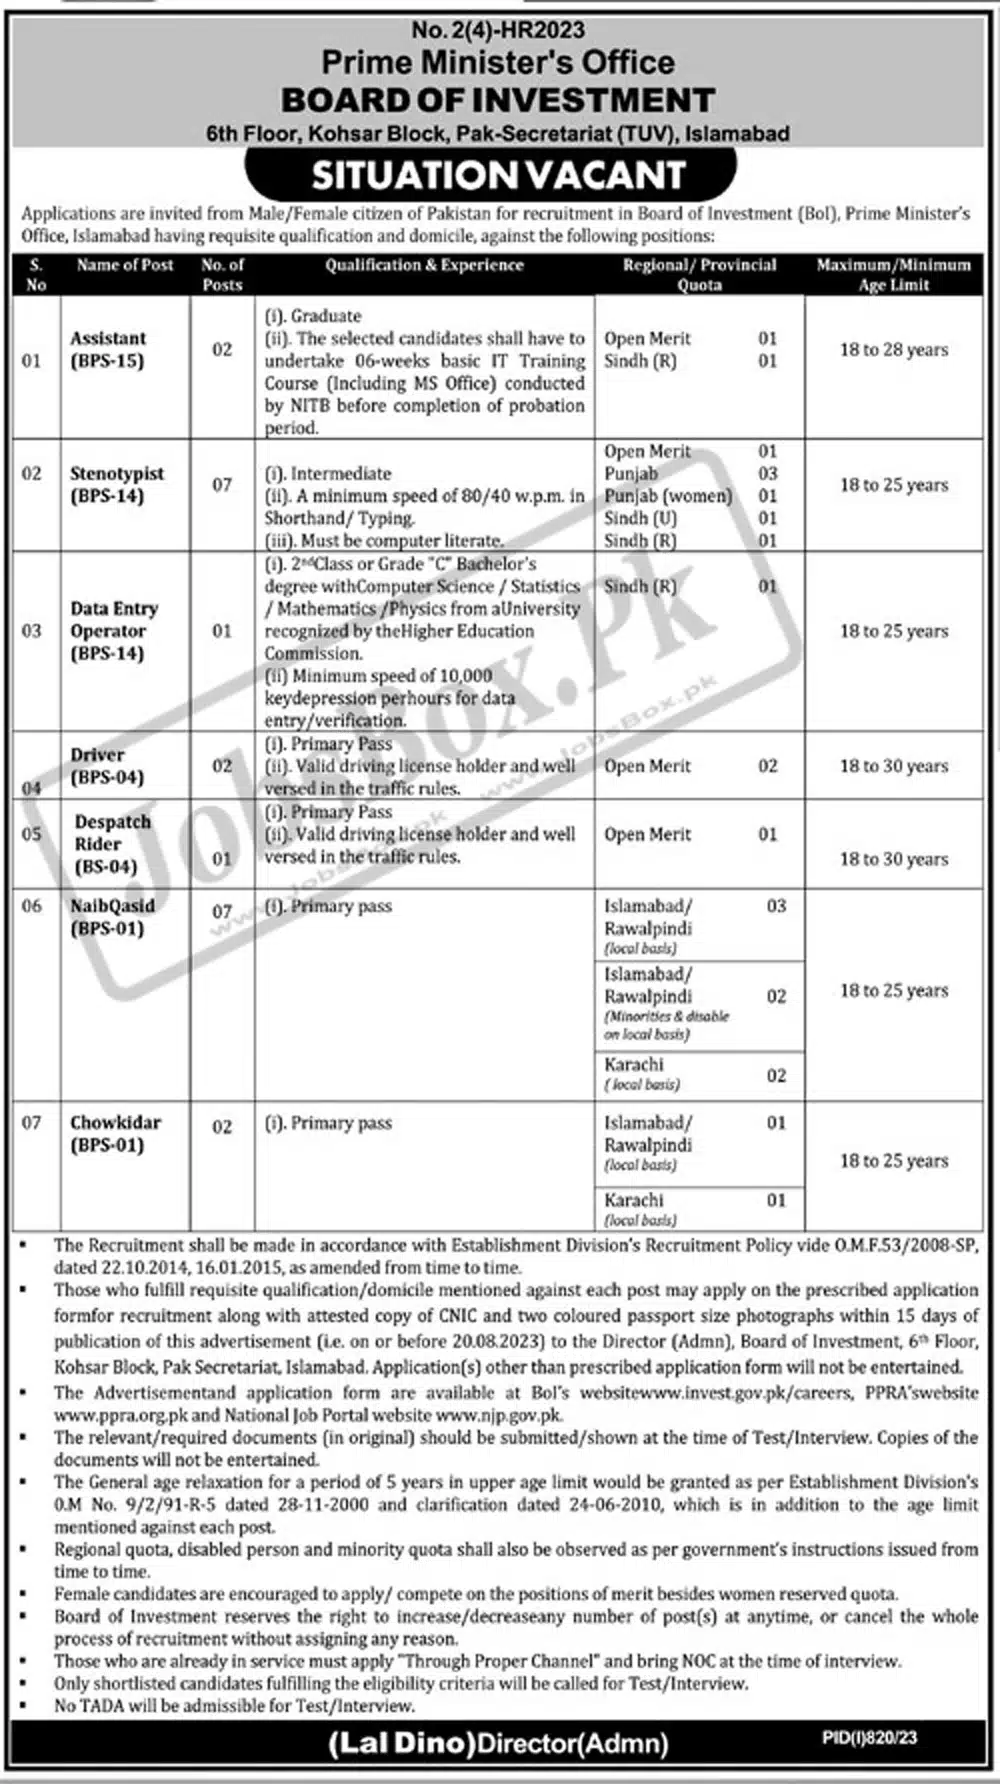 Latest Jobs Opportunities in Prime Minister Office 2023 | Download Application Form